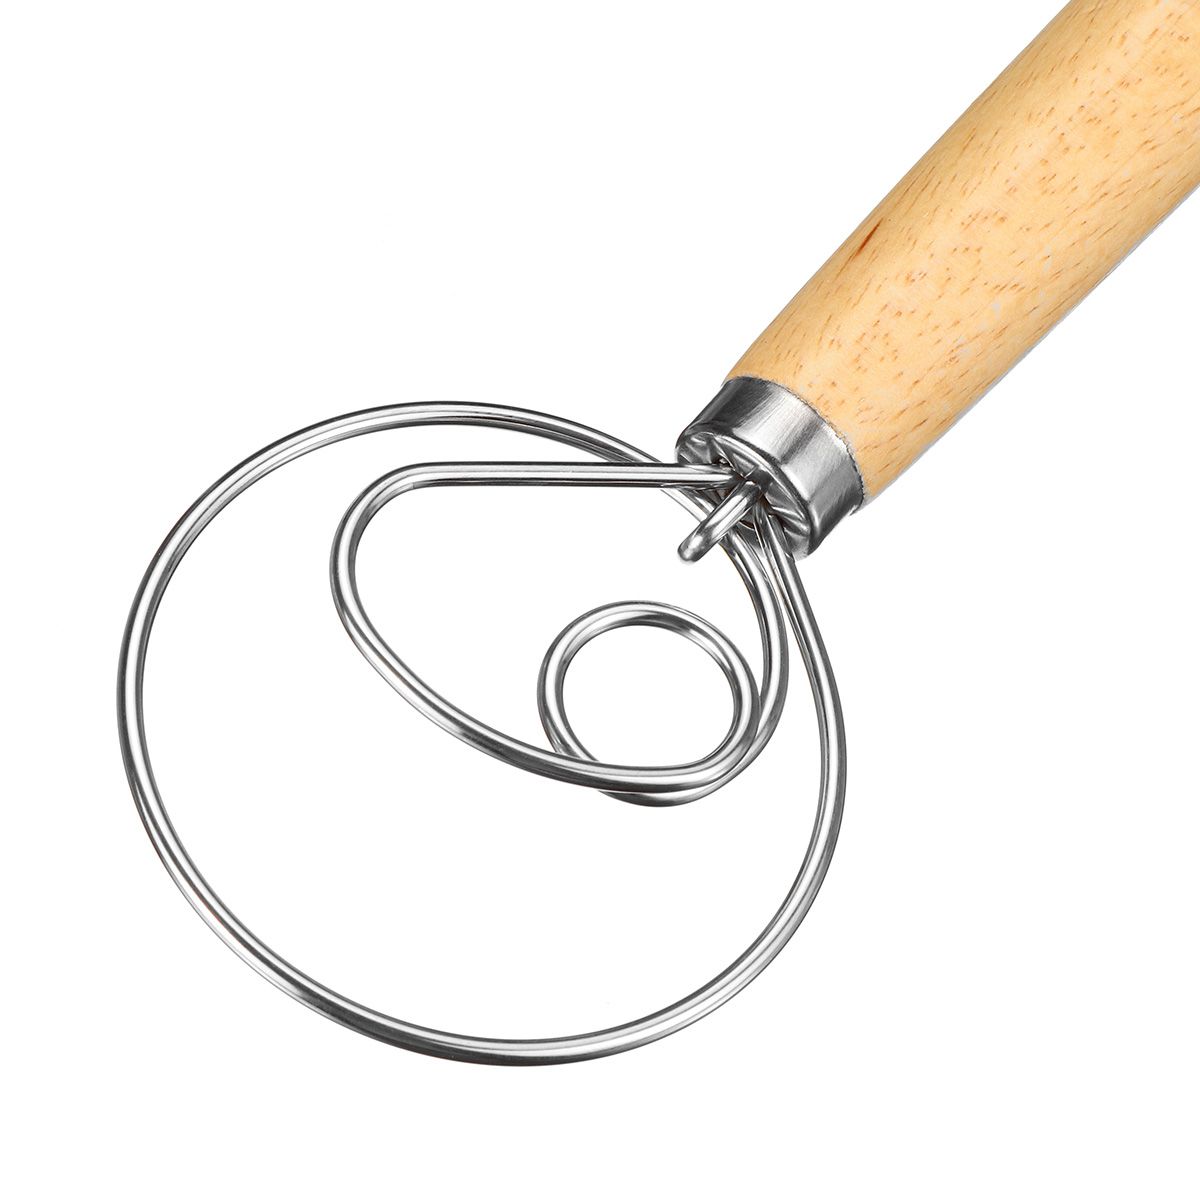 Dough-Whisk-Hand-Mixer-Bread-Curved-Blade-Cutter-Beater-Baking-Kitchen-Tool-1720930